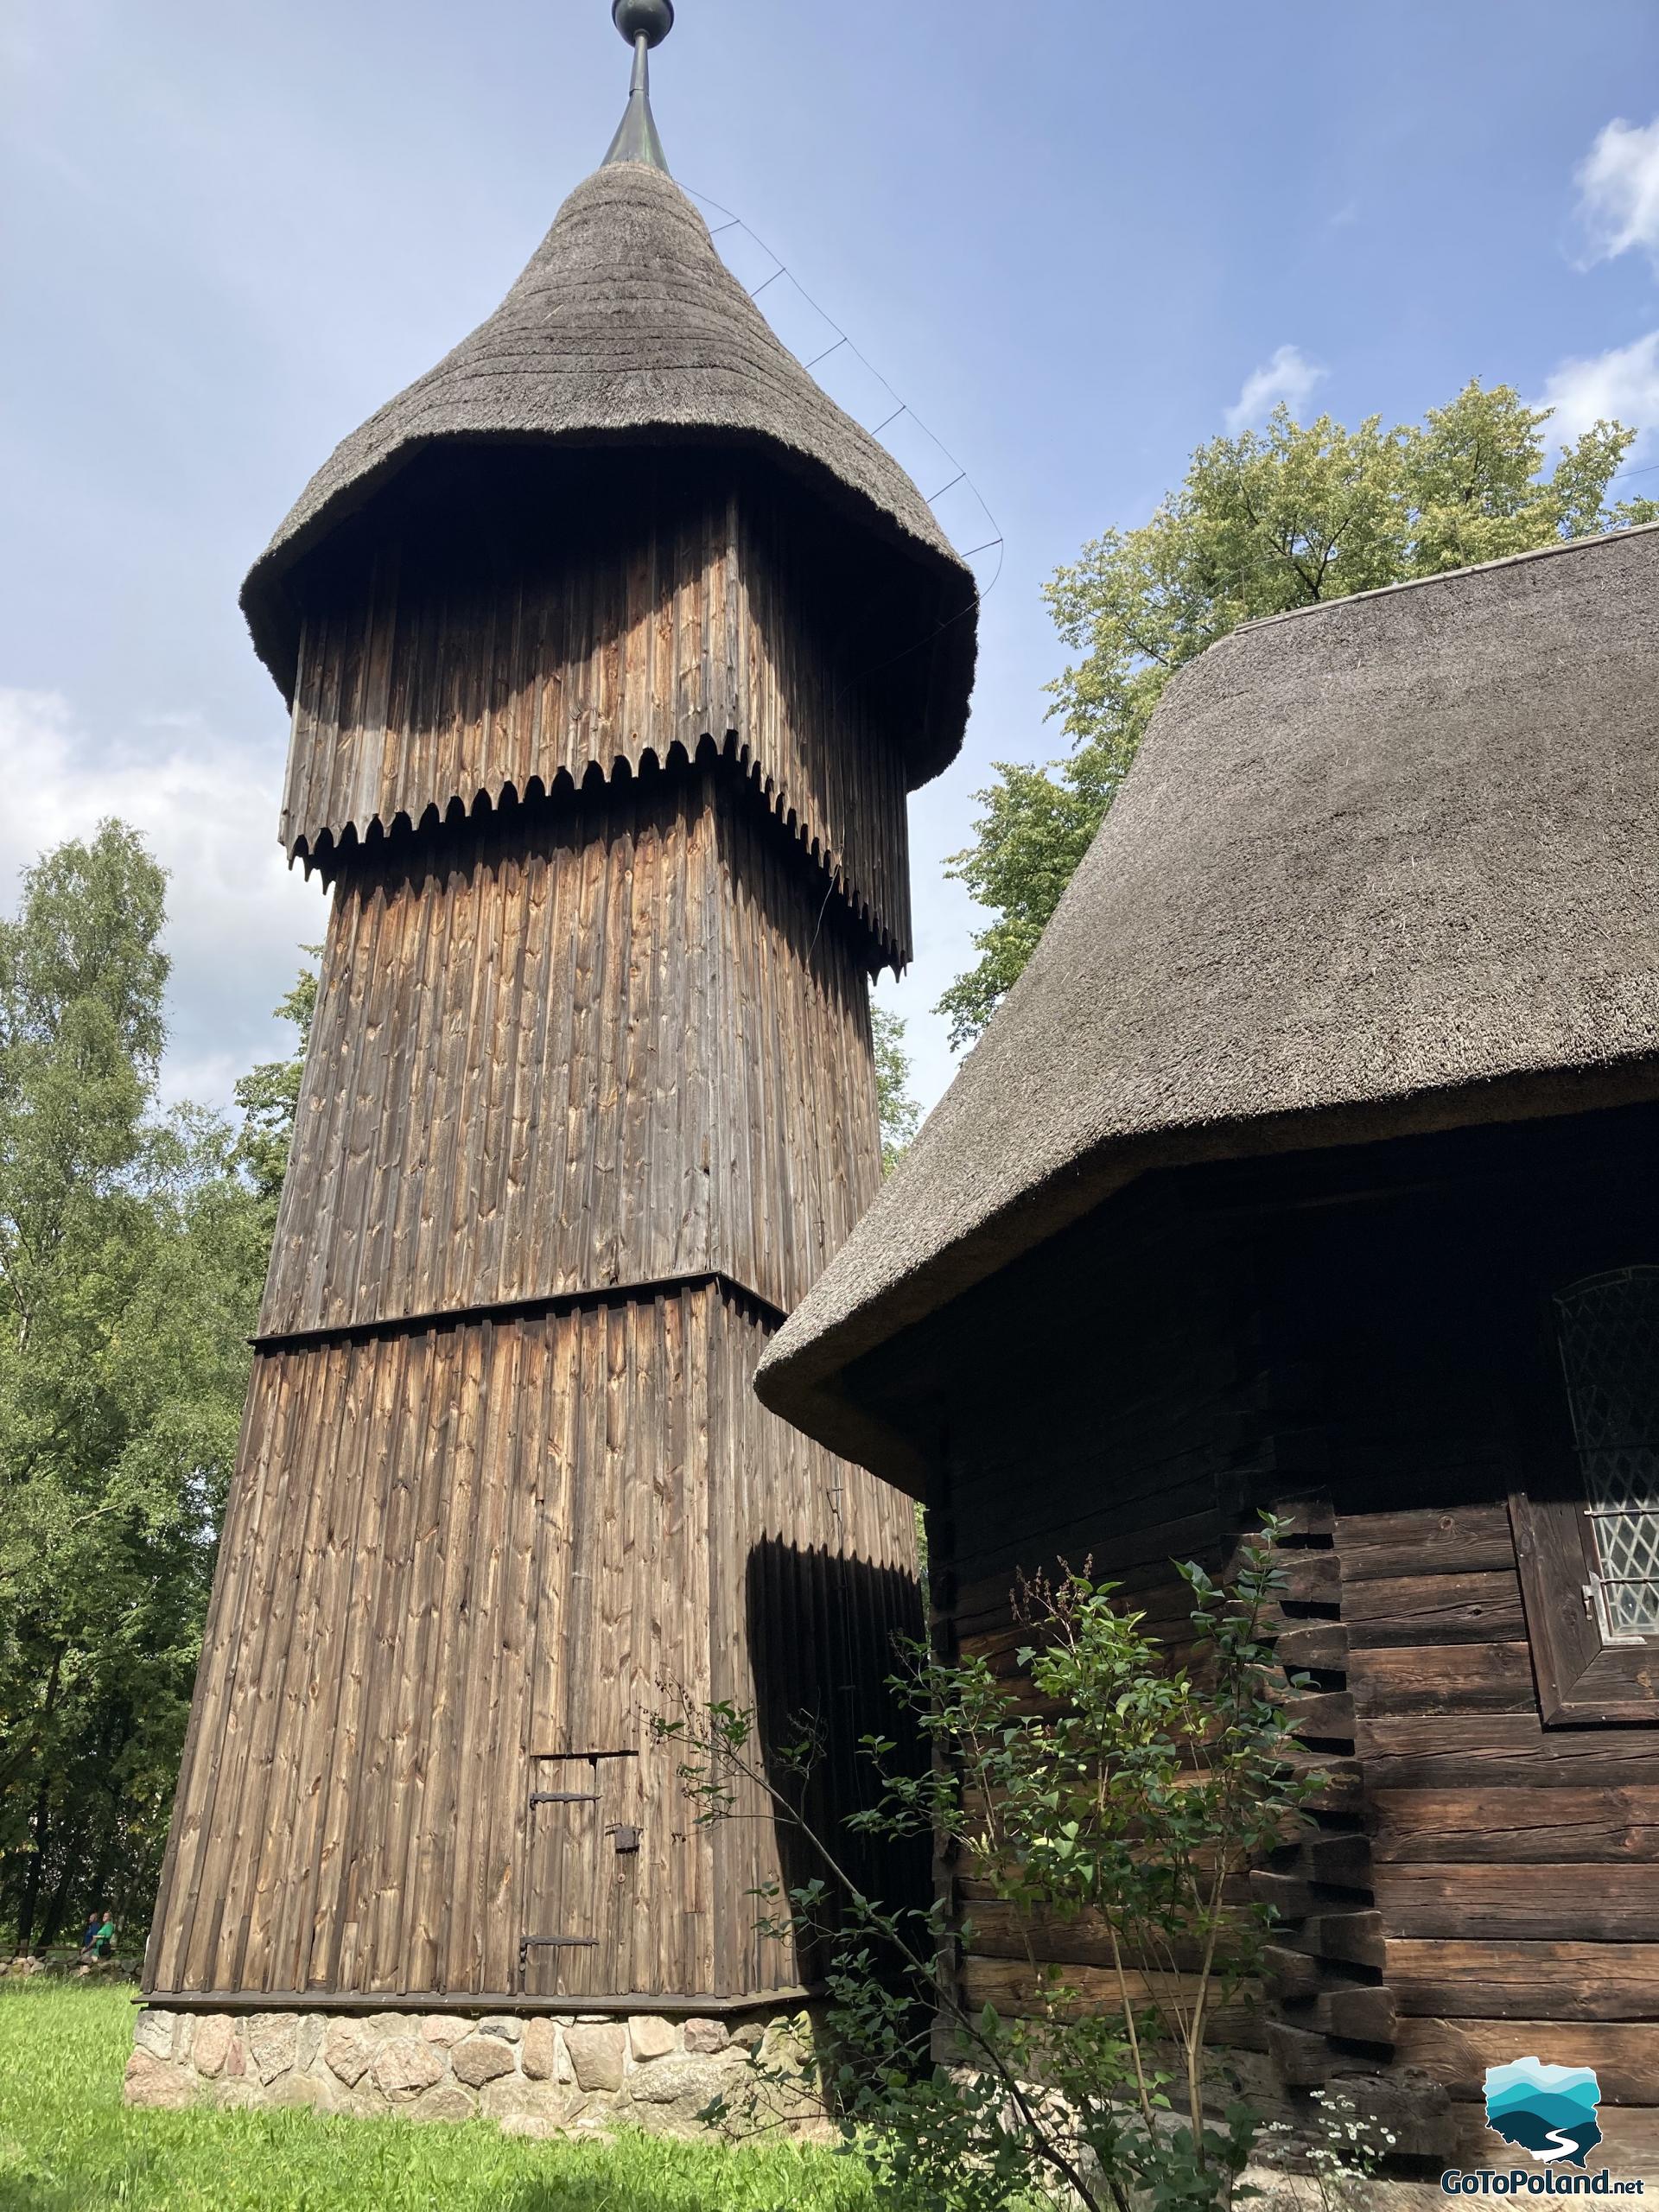 a wooden tower belonging to the wooden building